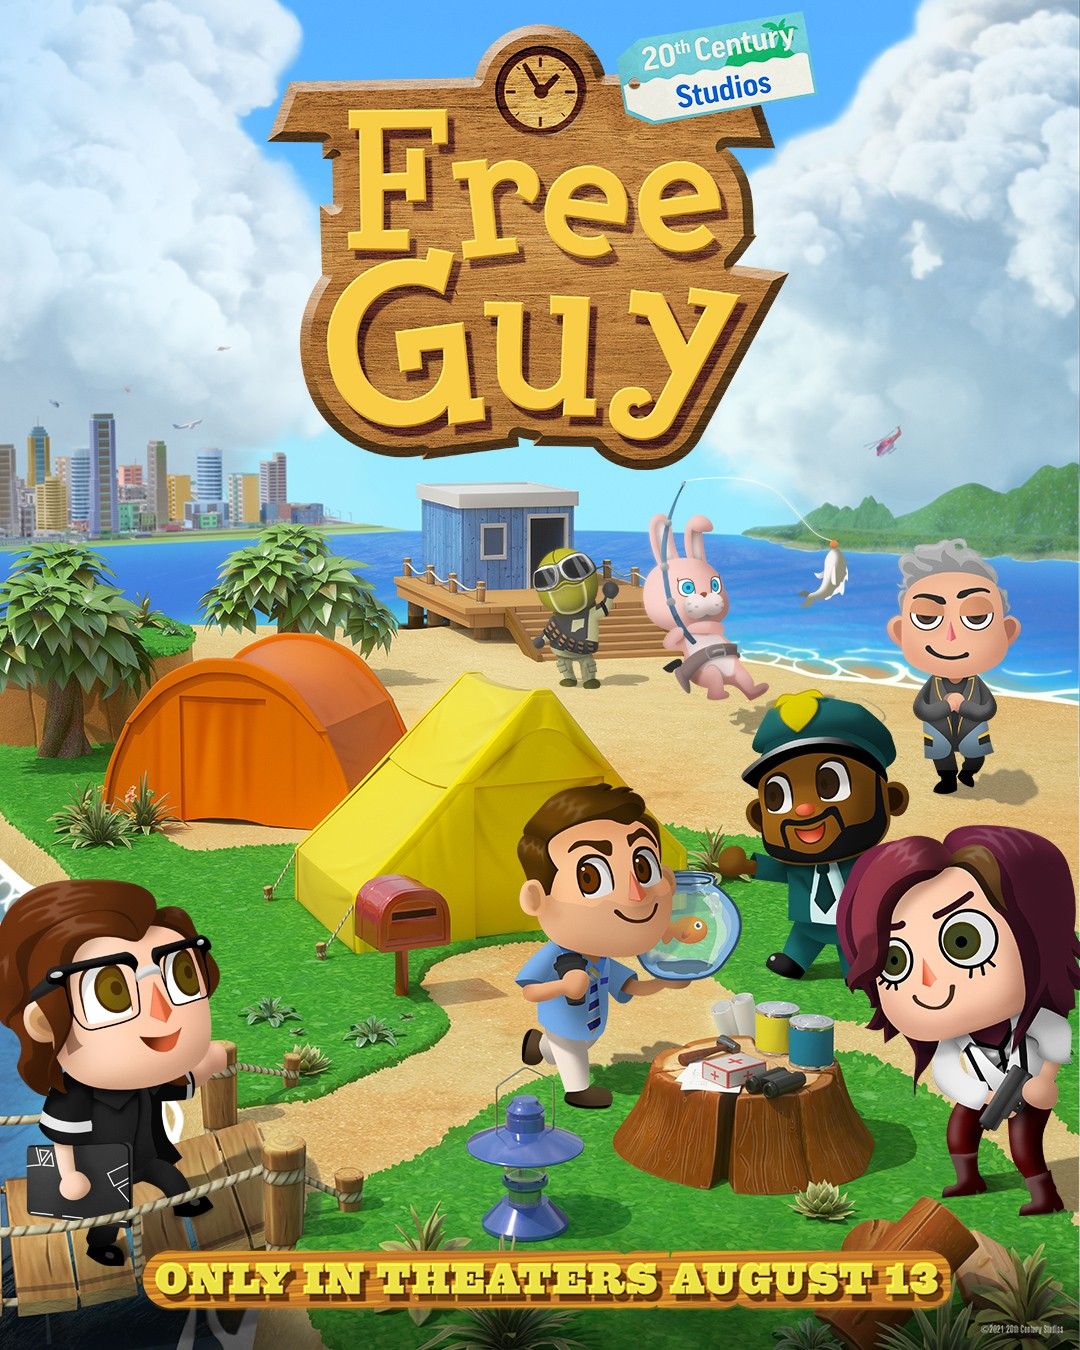 Free Guy Posters Parody Minecraft GTA Among Us Mario & More Games